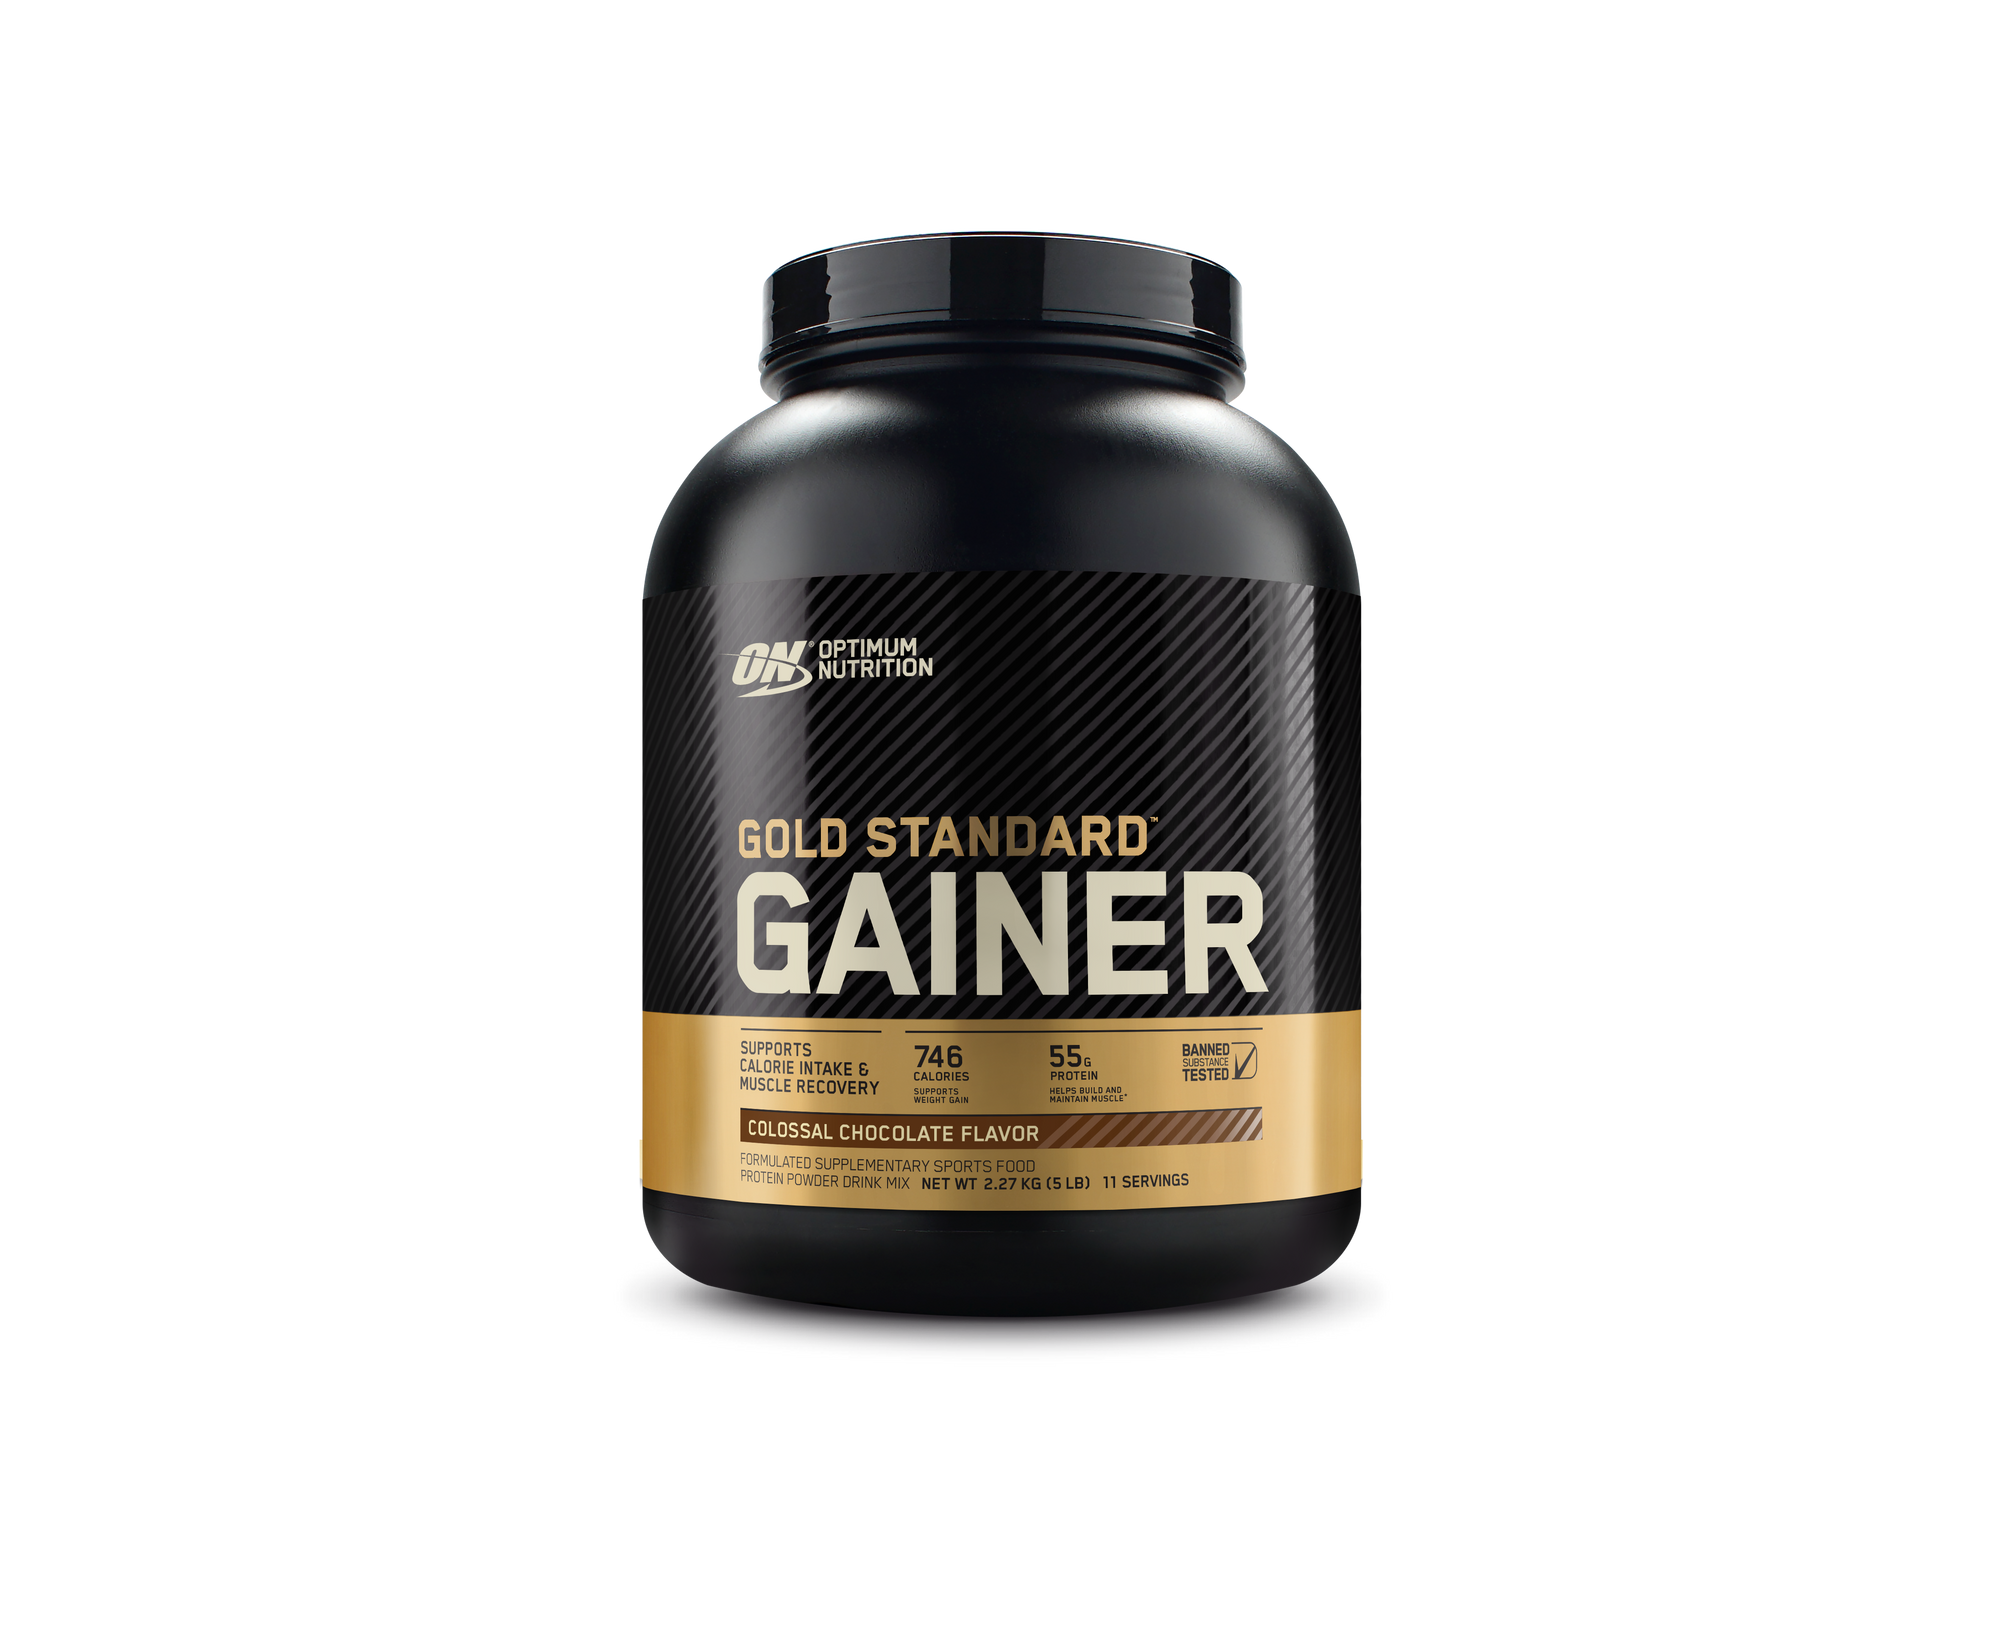 Fitness Hero Presents Optimum Nutrition Gold Standard Gainer, a premium high calorie mass gainer protein powder designed for the trainer who wants to gain size fast.